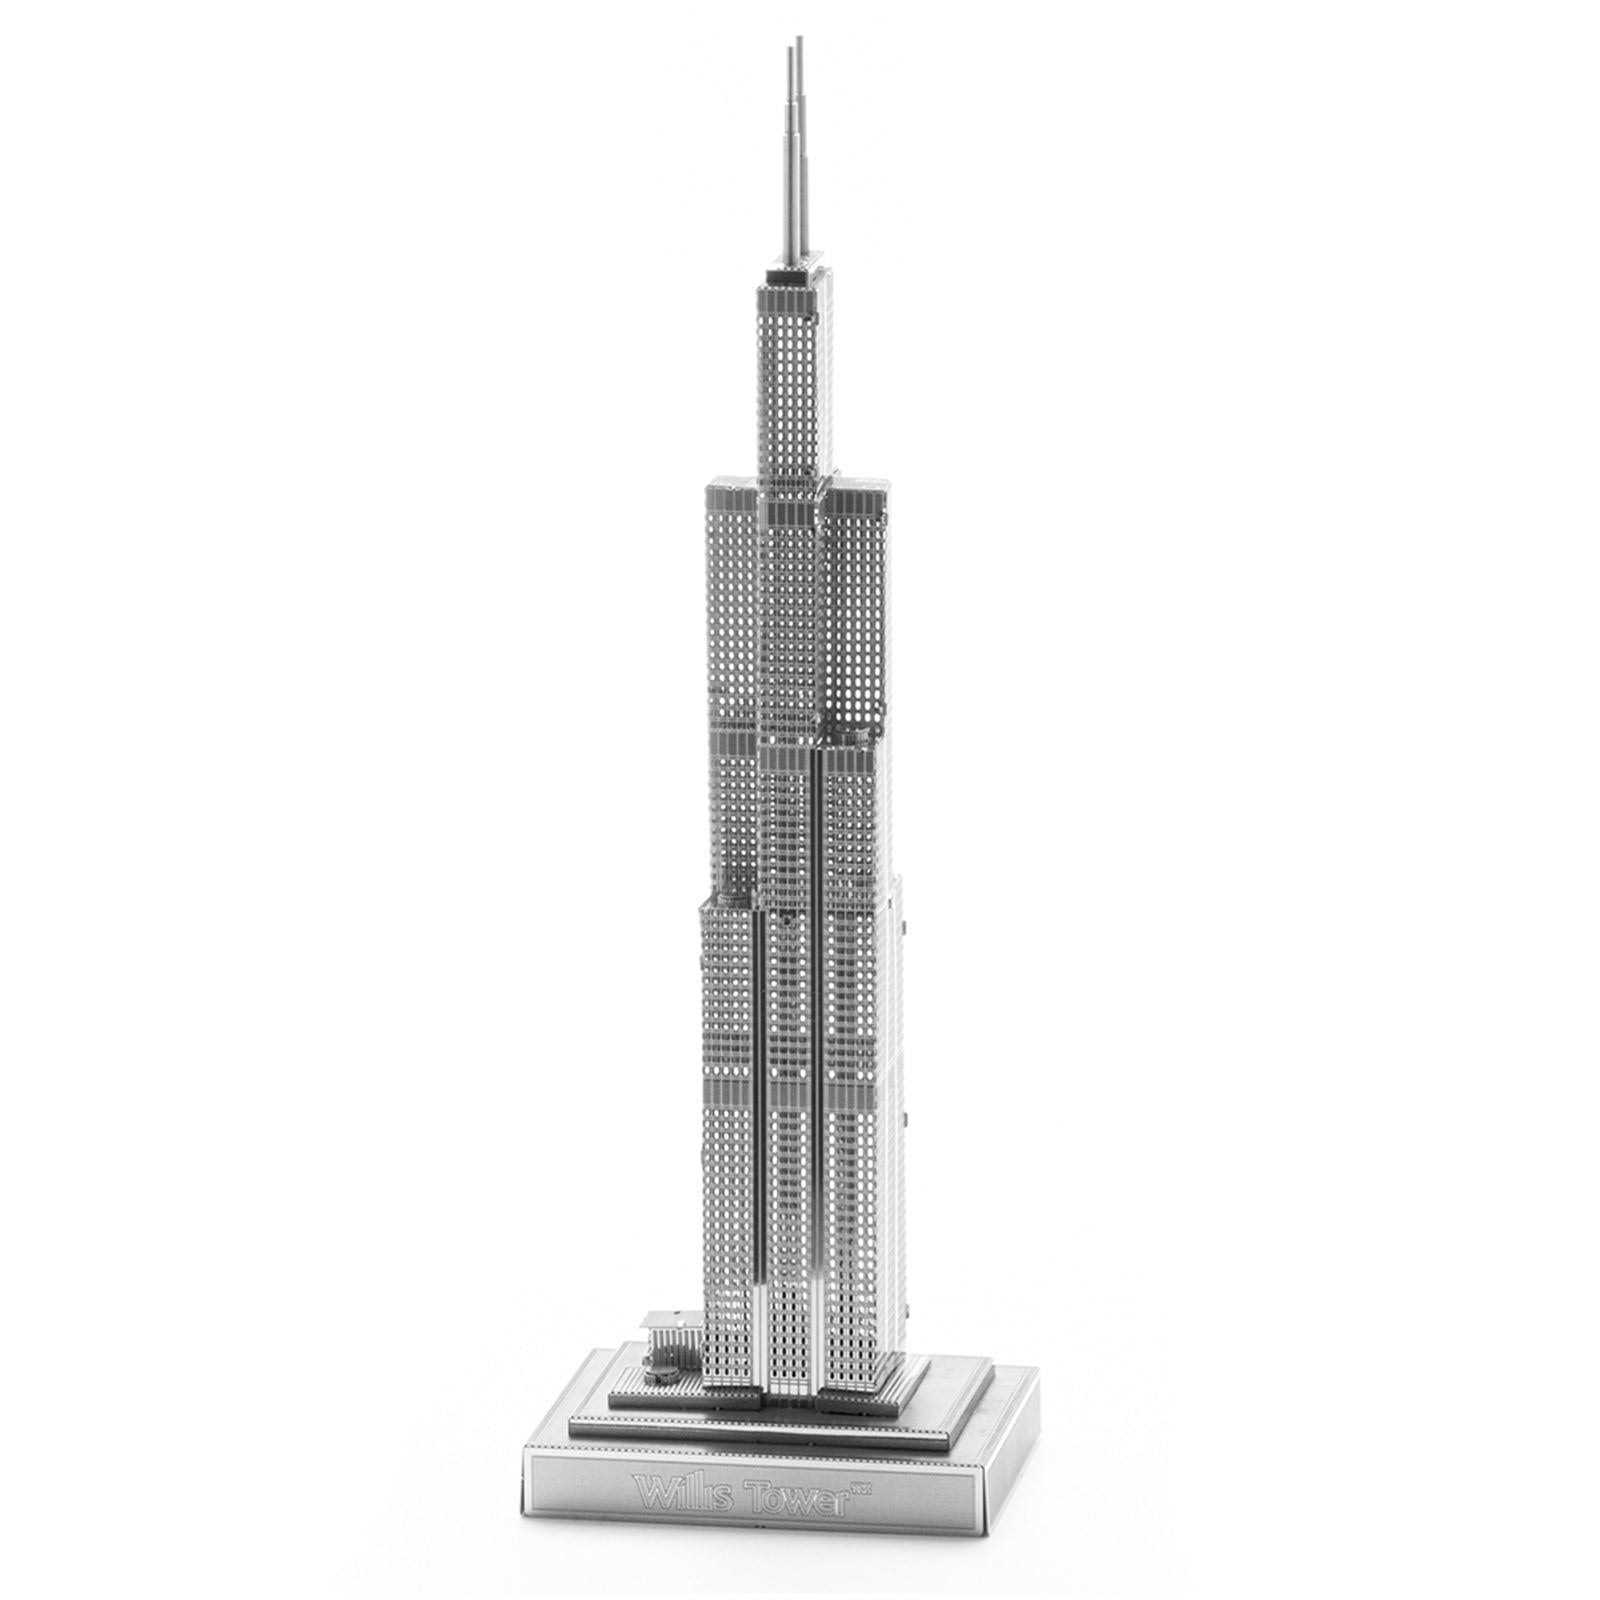 Fascinations Metal Earth ICONX 3D Laser Cut Model - Sears Tower